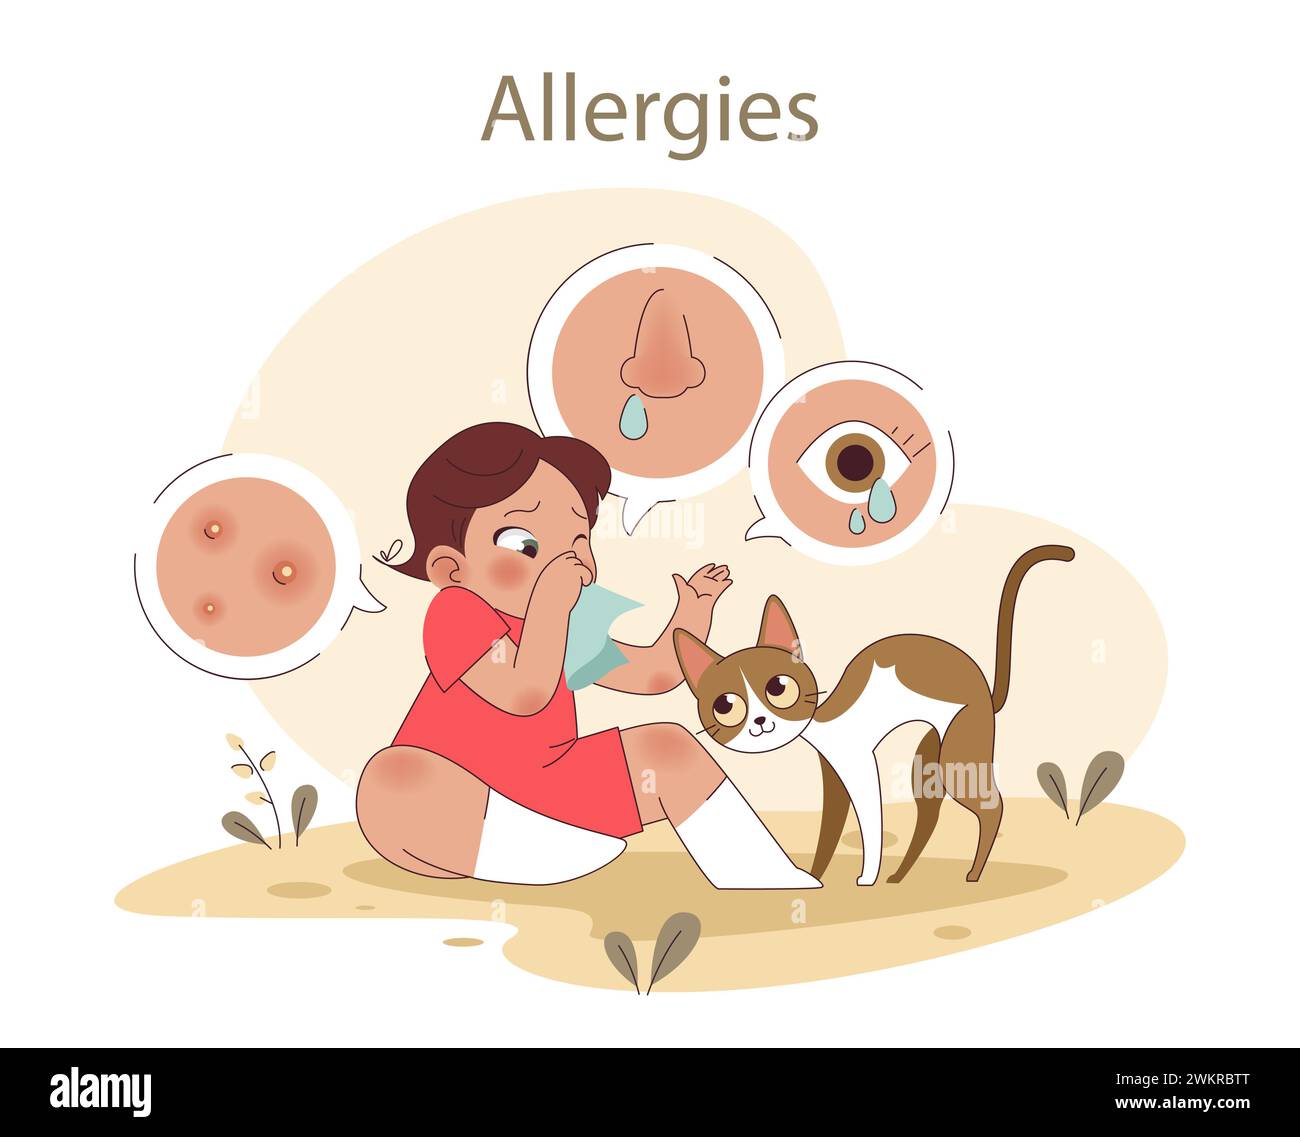 Allergies concept. A child experiences common symptoms around a cat, depicting health challenges in pet interactions. Flat vector illustration Stock Vector